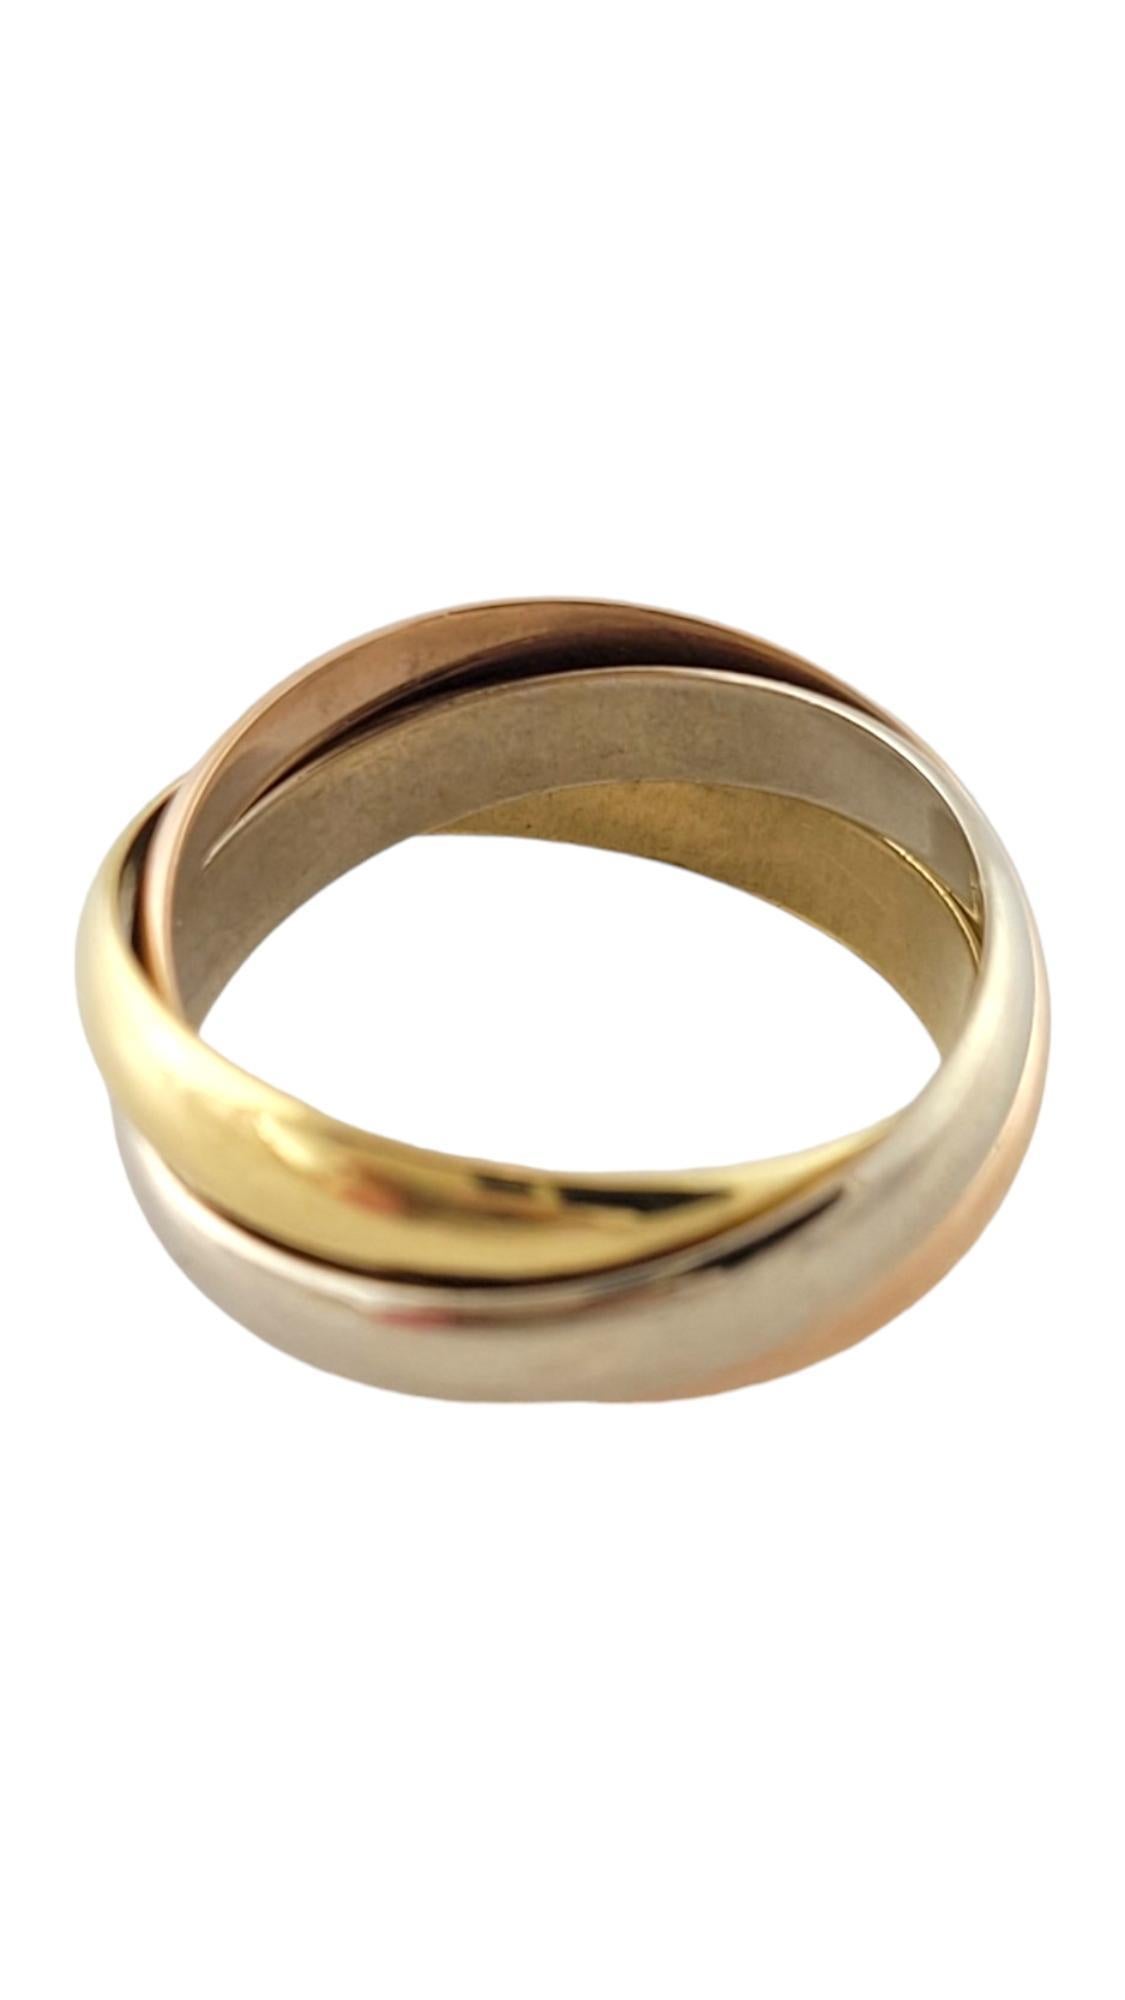 18K Tri Colored Gold Wide Rolling Ring Size 6.5 #17375 In Good Condition For Sale In Washington Depot, CT